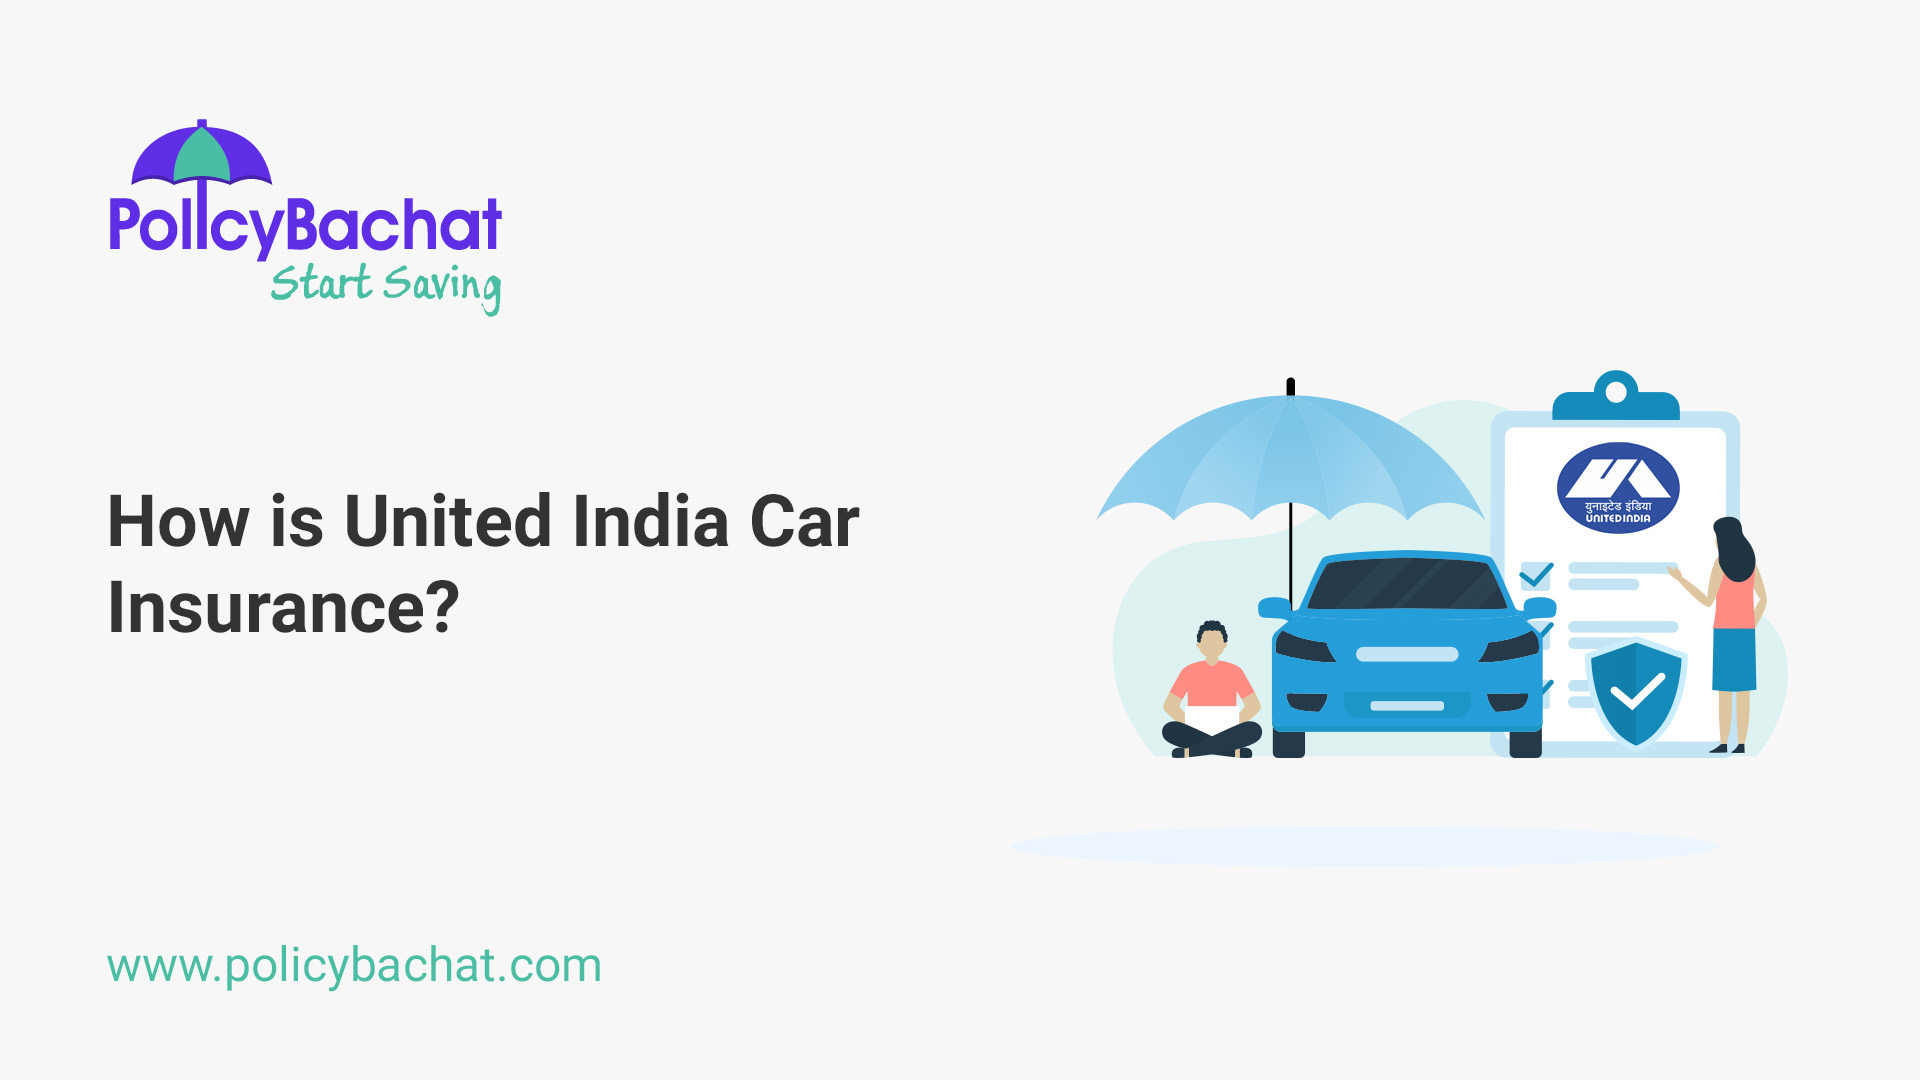 How is United India Car Insurance? - PolicyBachat